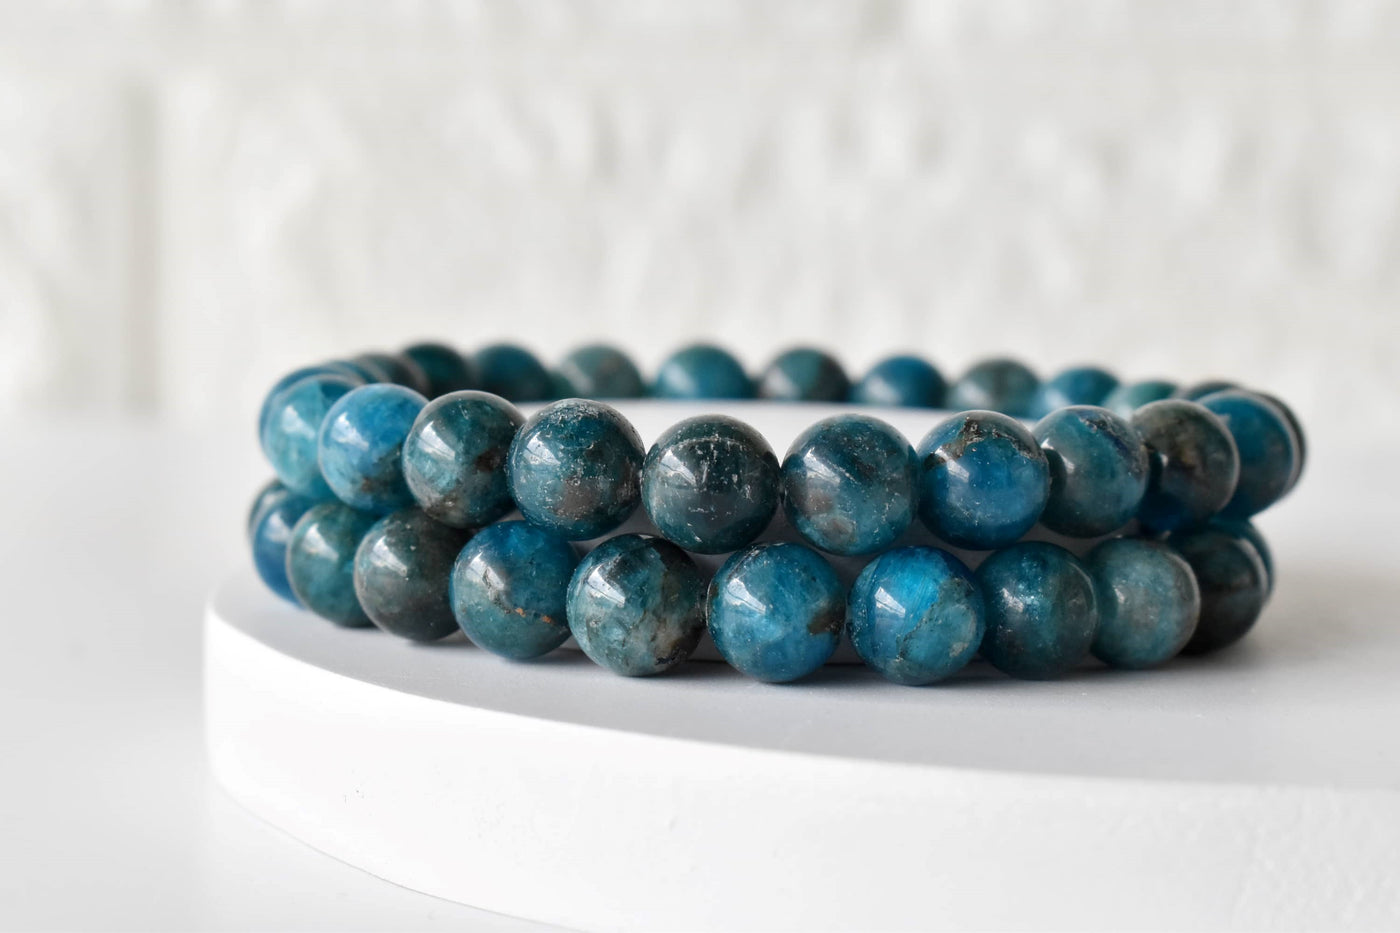 Apatite Bracelet ( Weight Control and Strength )